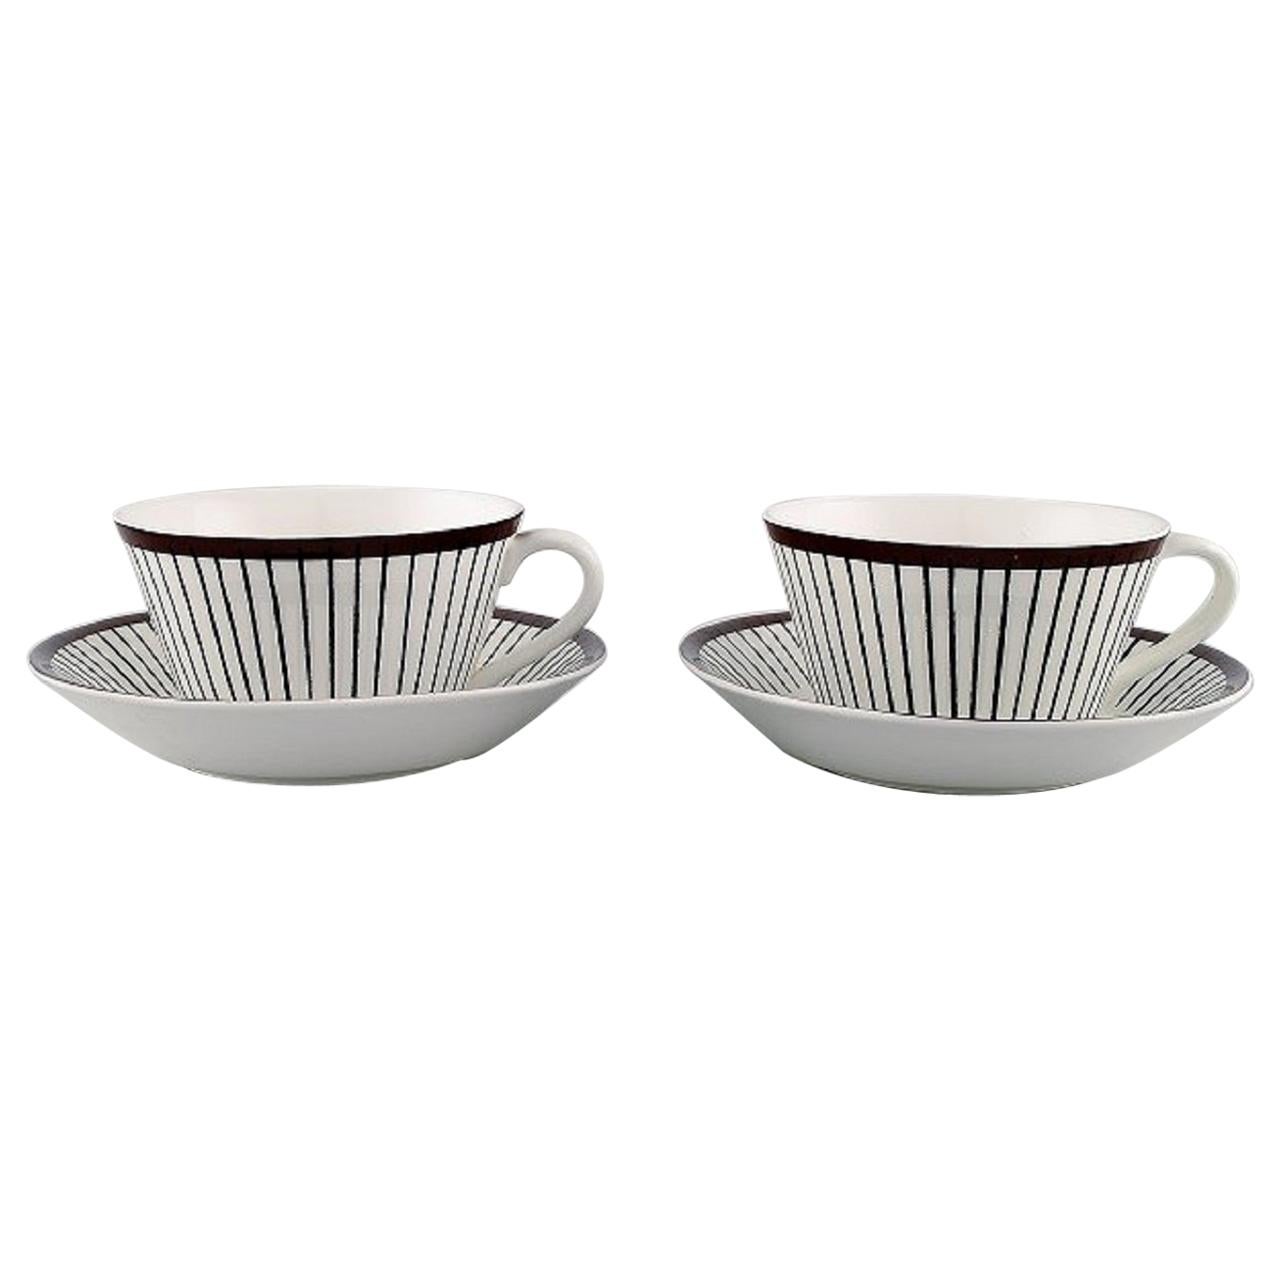 Stig Lindberg for Gustavsberg, a Pair of "Spisa Ribb" Tea Cups with Saucers